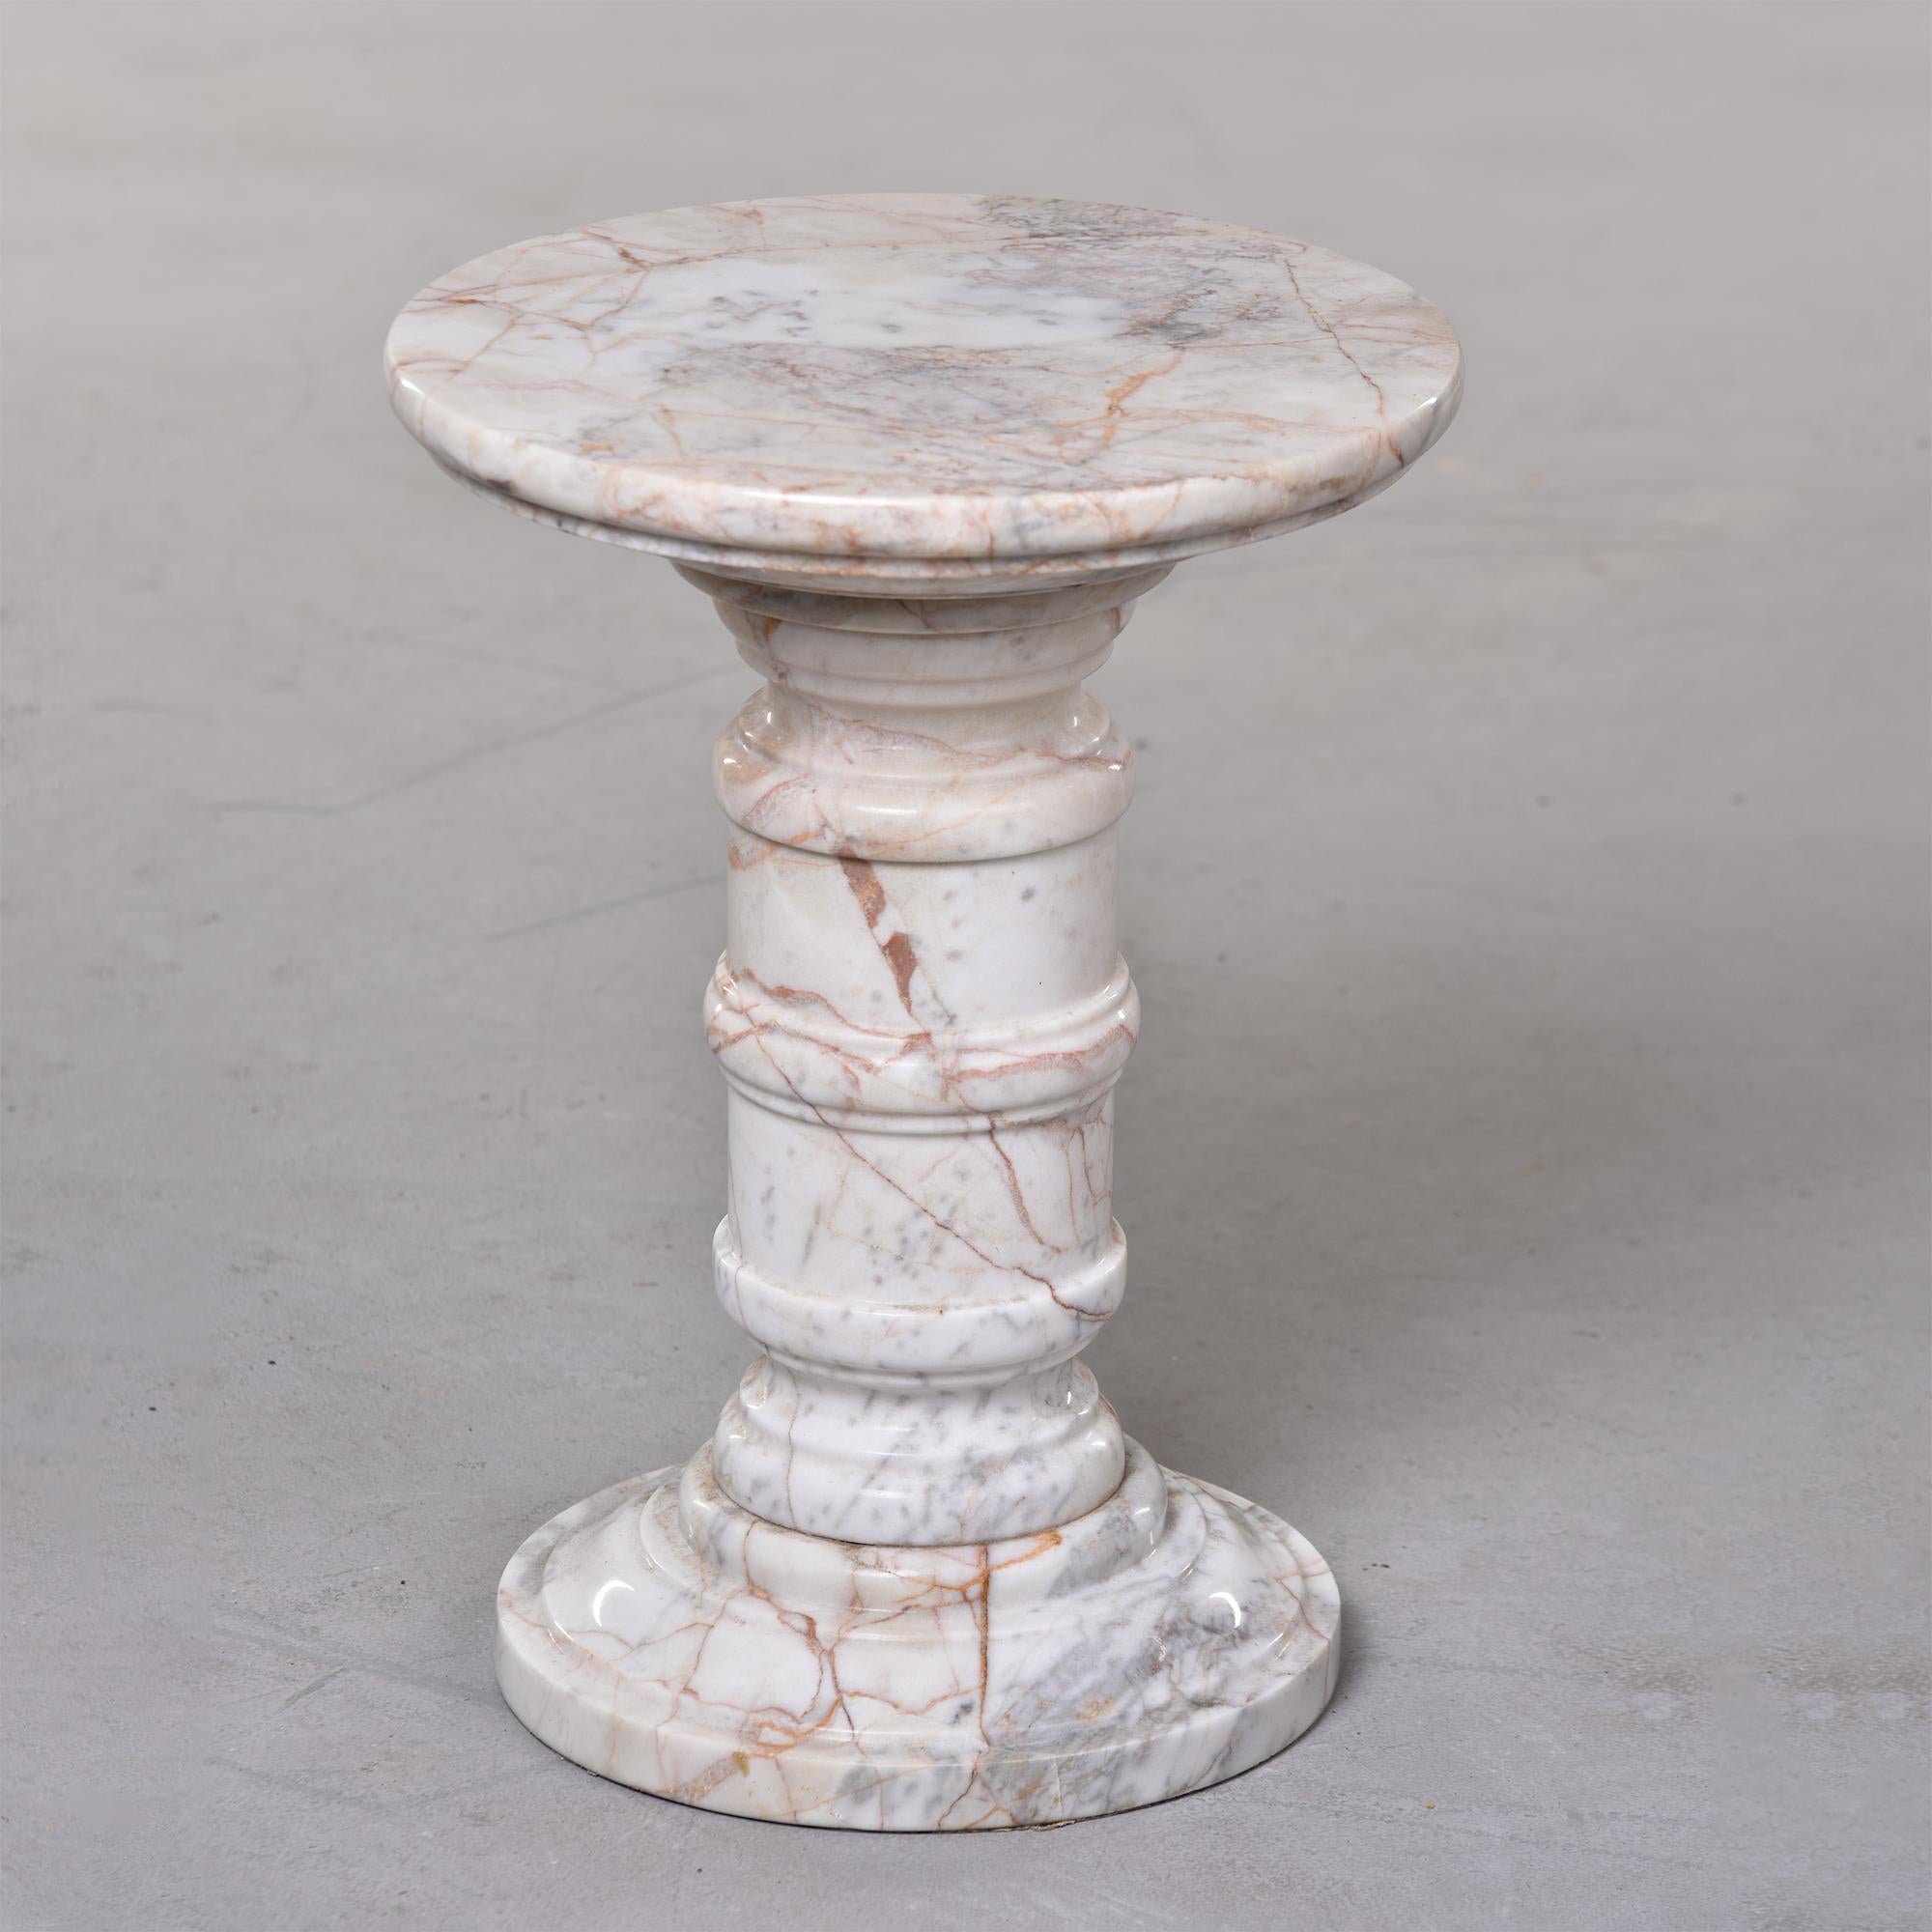 circa 1970s small Italian marble table or stand with turned pedestal base and round top. Marble is white with streaks of gray and apricot. Very good vintage condition with no flaws found - very minor scattered surface wear.